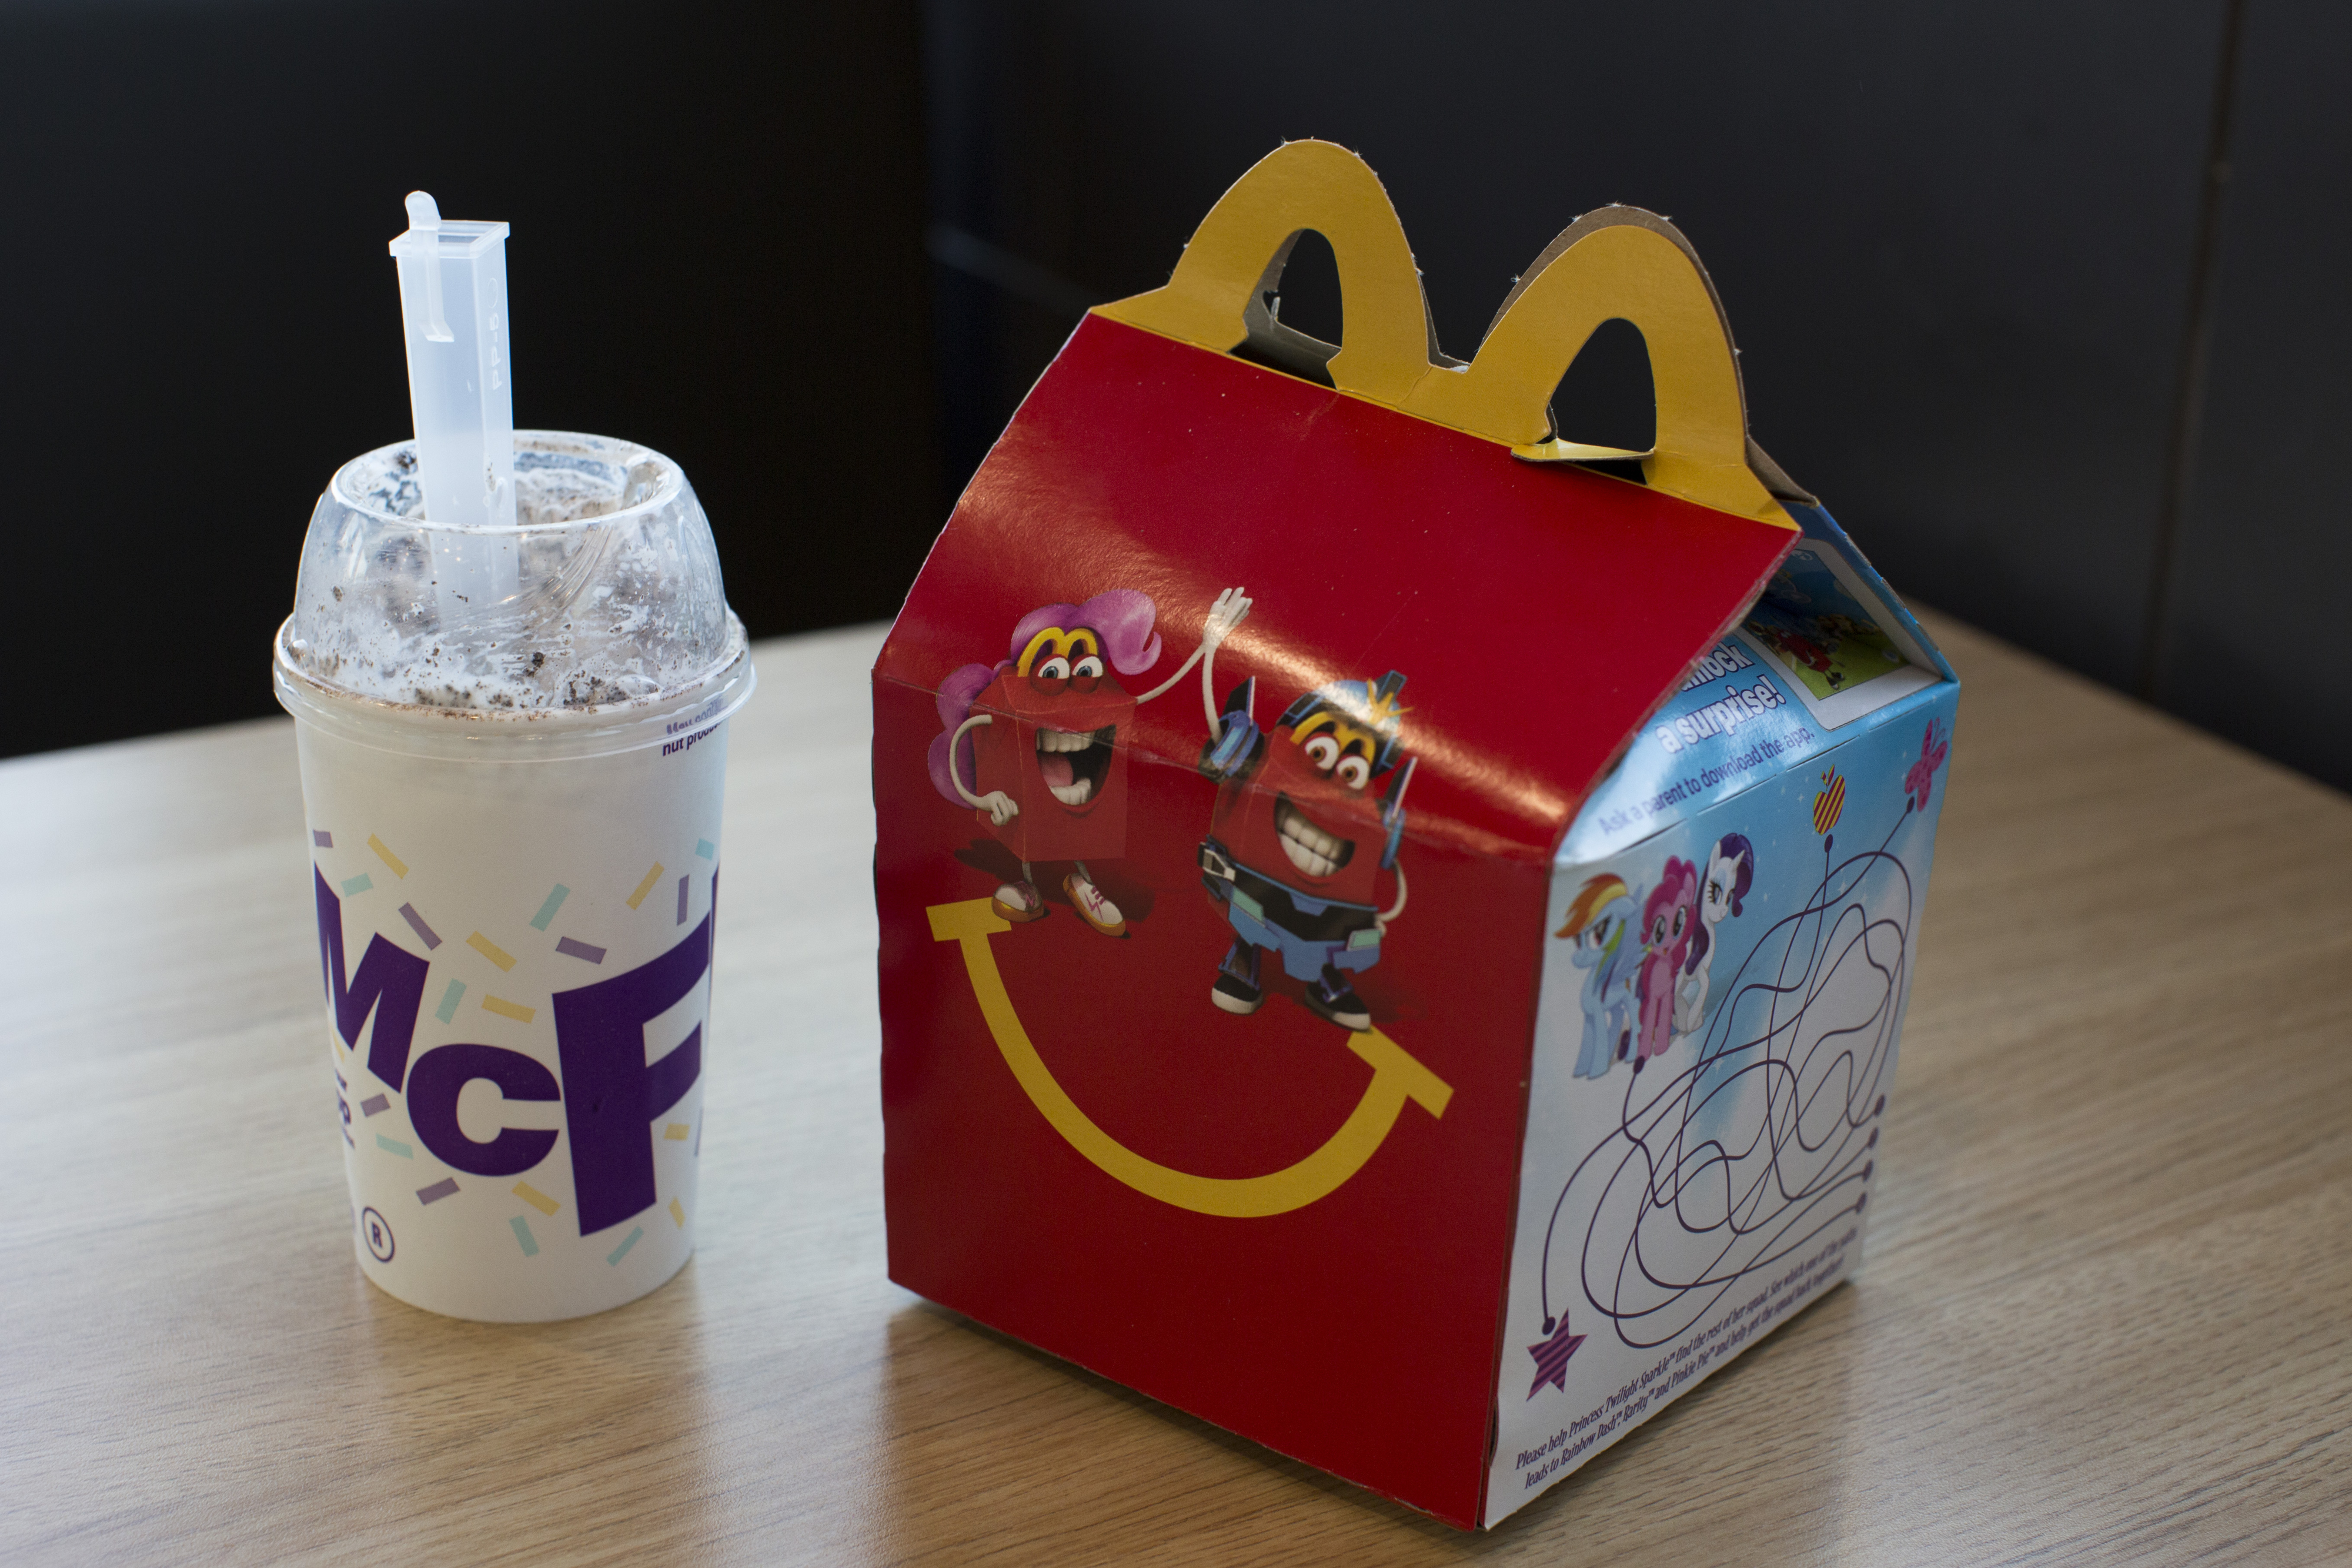 McDonald's Has a New Dollar Menu. Here's What You Can Get for $1